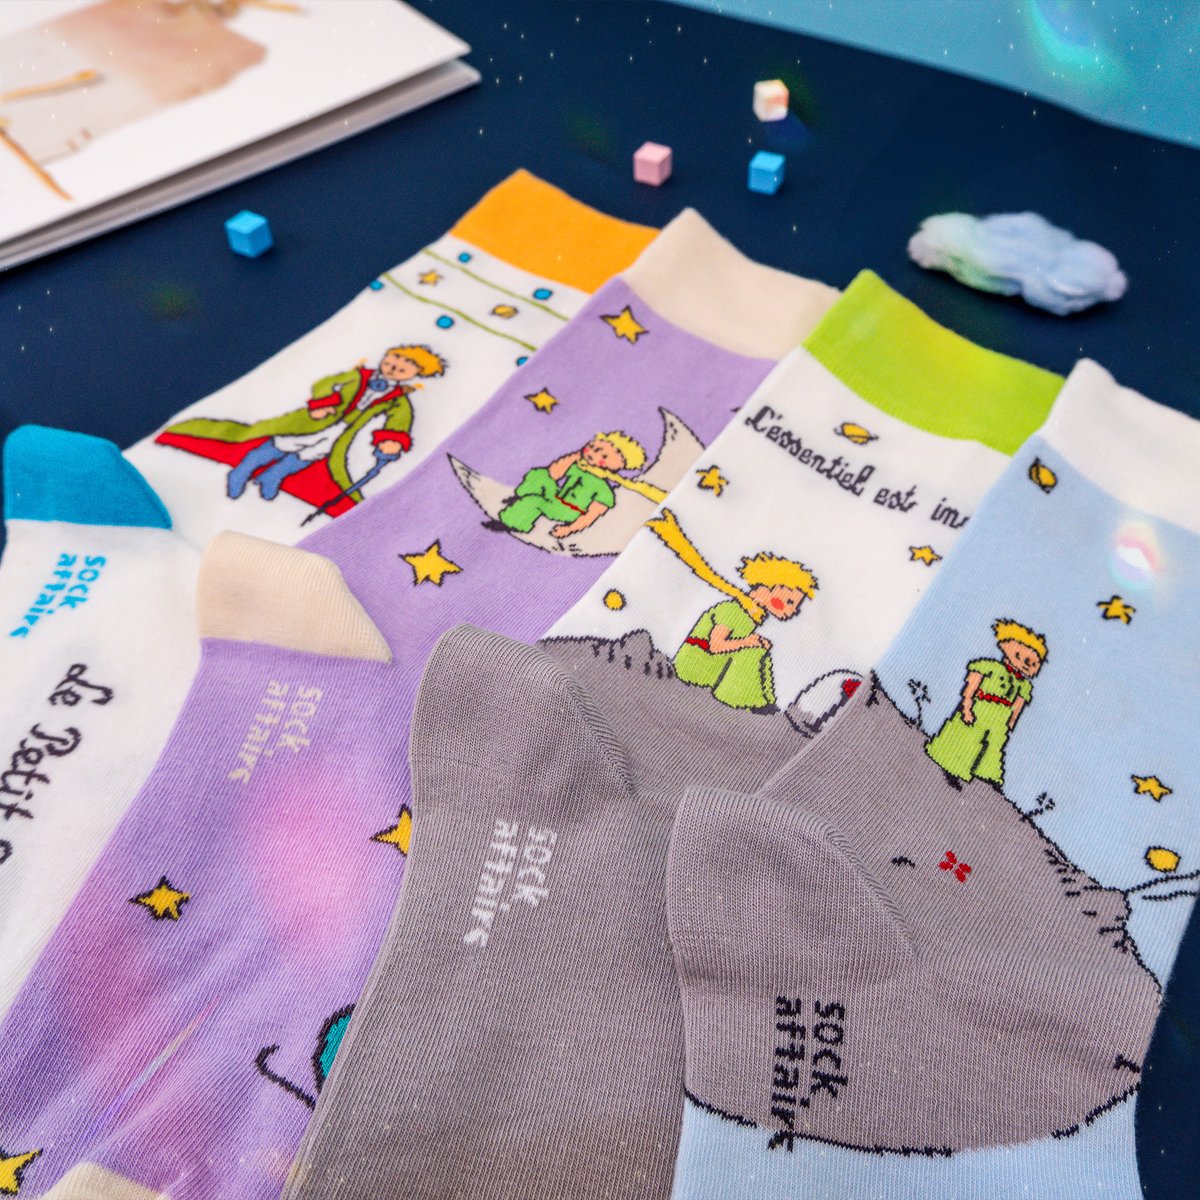 Your favorite childhood story just got a whole lot cozier! Introducing our latest collab with Sock Affair: The Little Prince's socks!🧦✨ Let The Little Prince warm not only your toes but your hearts too.💕 ⭐Get them on sockaffairs.com #TheLittlePrince #LePetitPrince